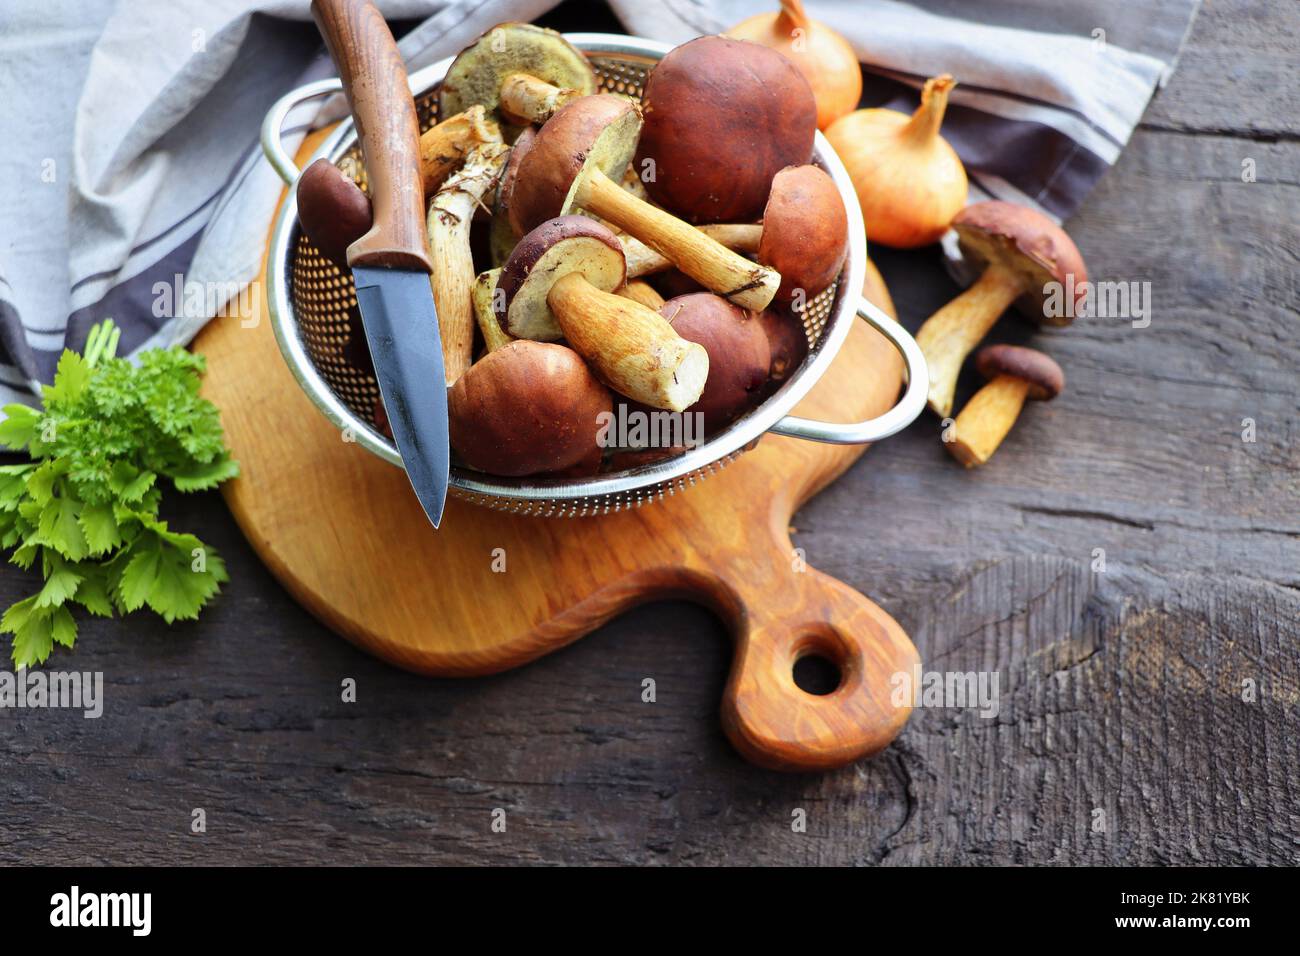 Forest boletus mushrooms on rustic wooden background and a wooden cutting board Stock Photo